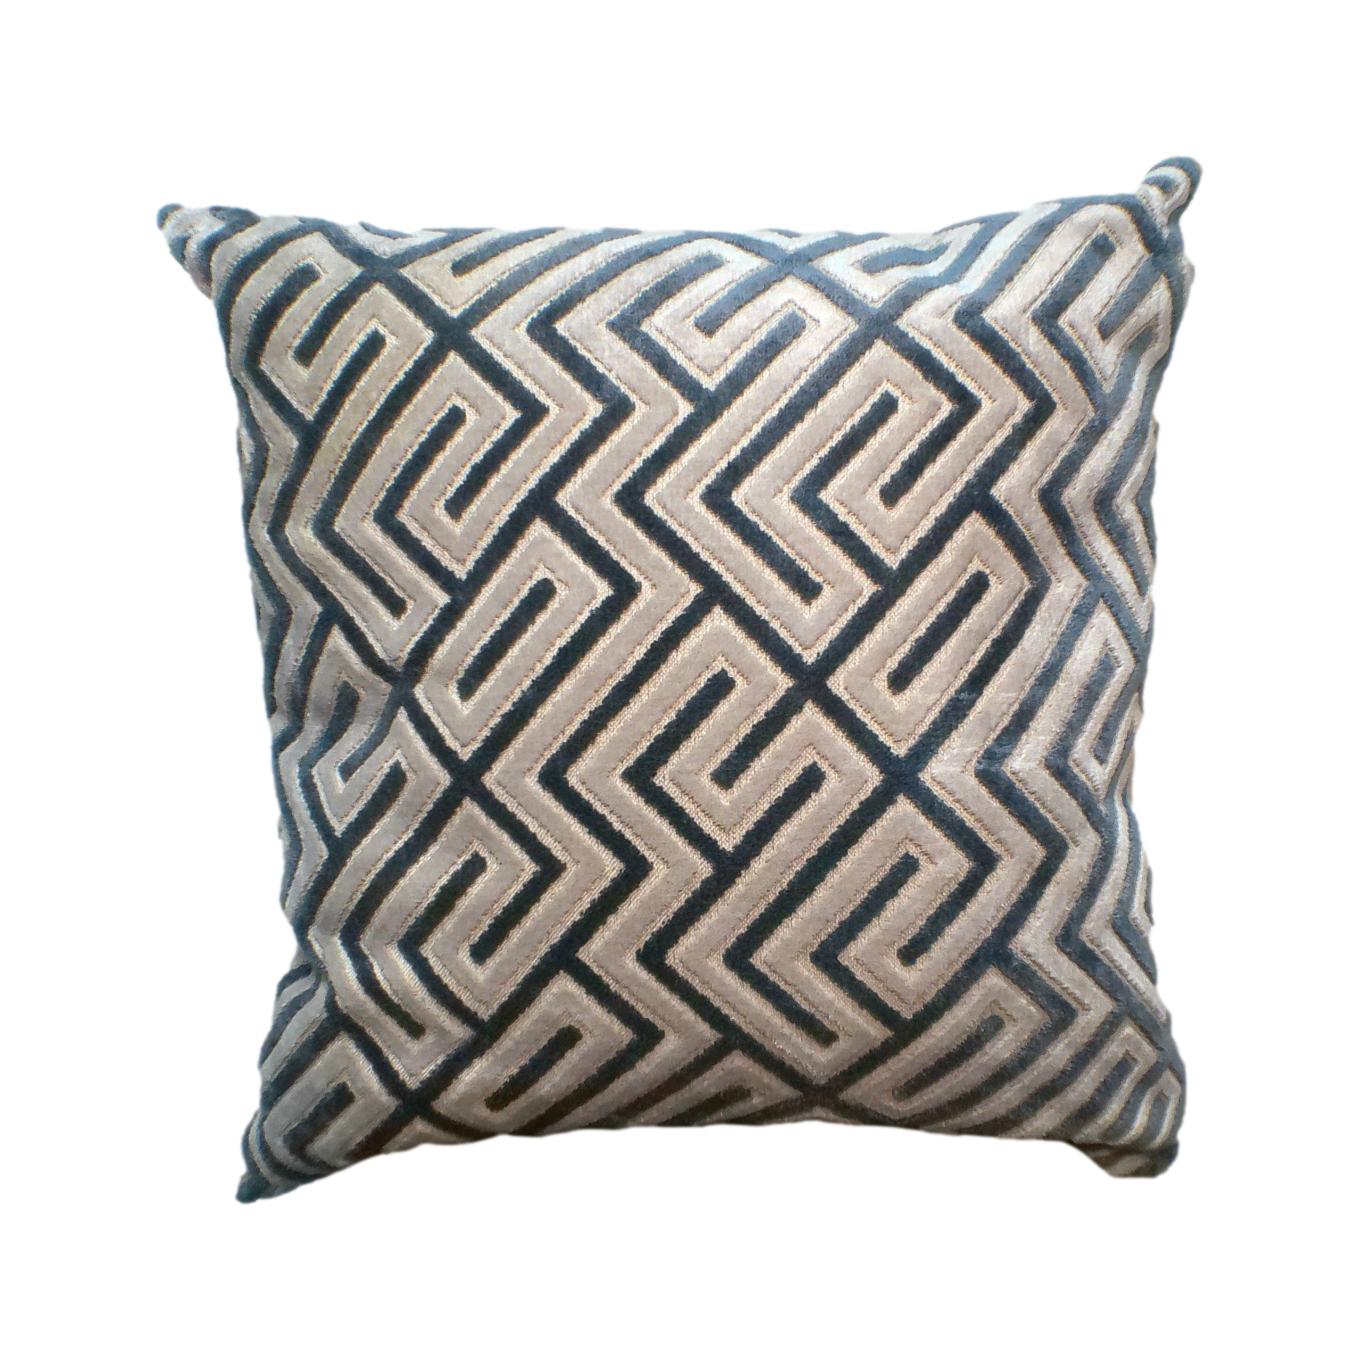 Blue and Gray Pillow